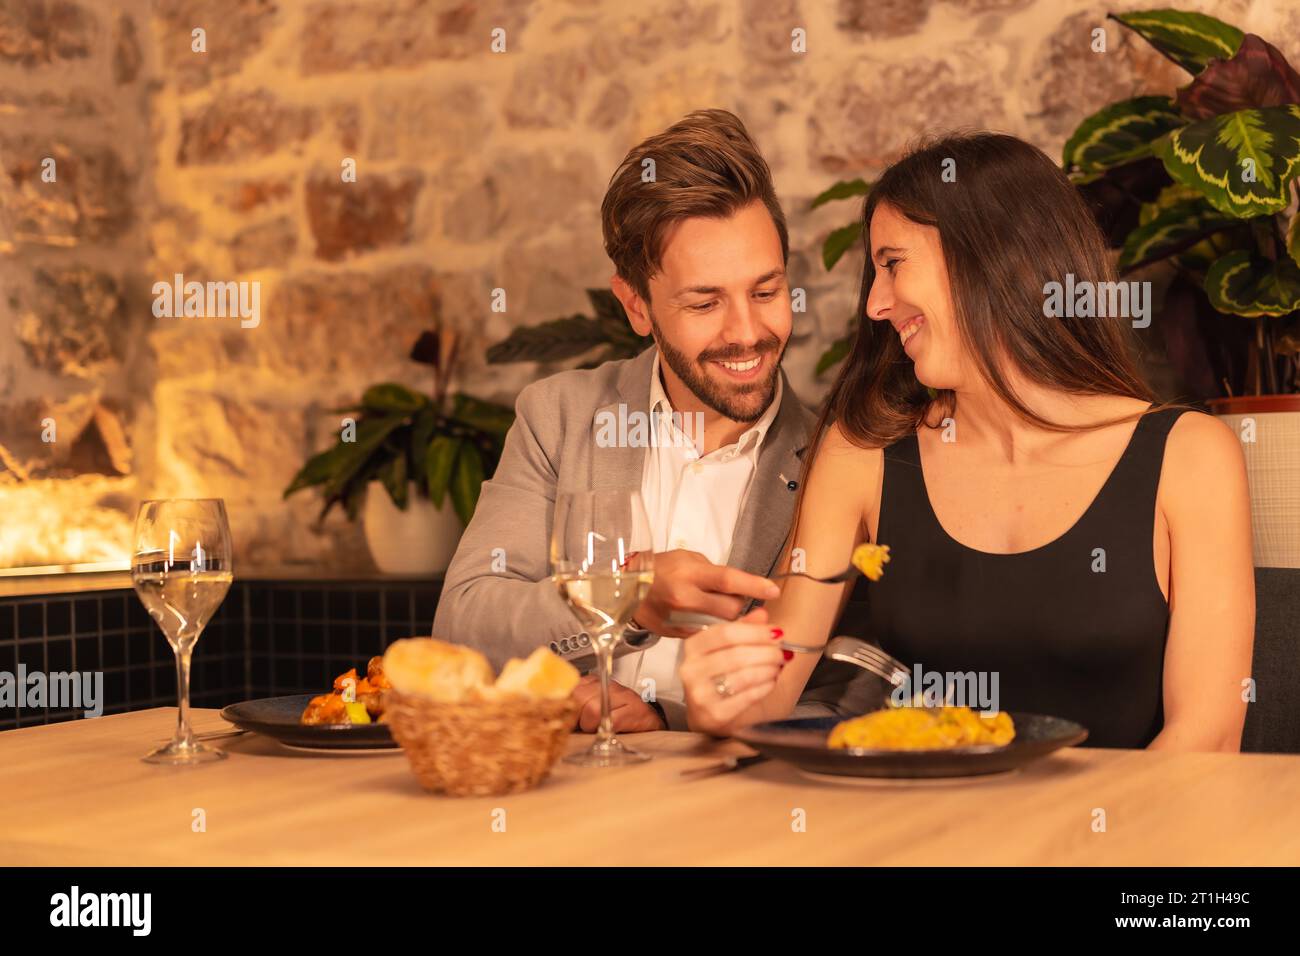 Lifestyle, a young european couple in a restaurant, having fun having dinner together with food, celebrating valentine Stock Photo